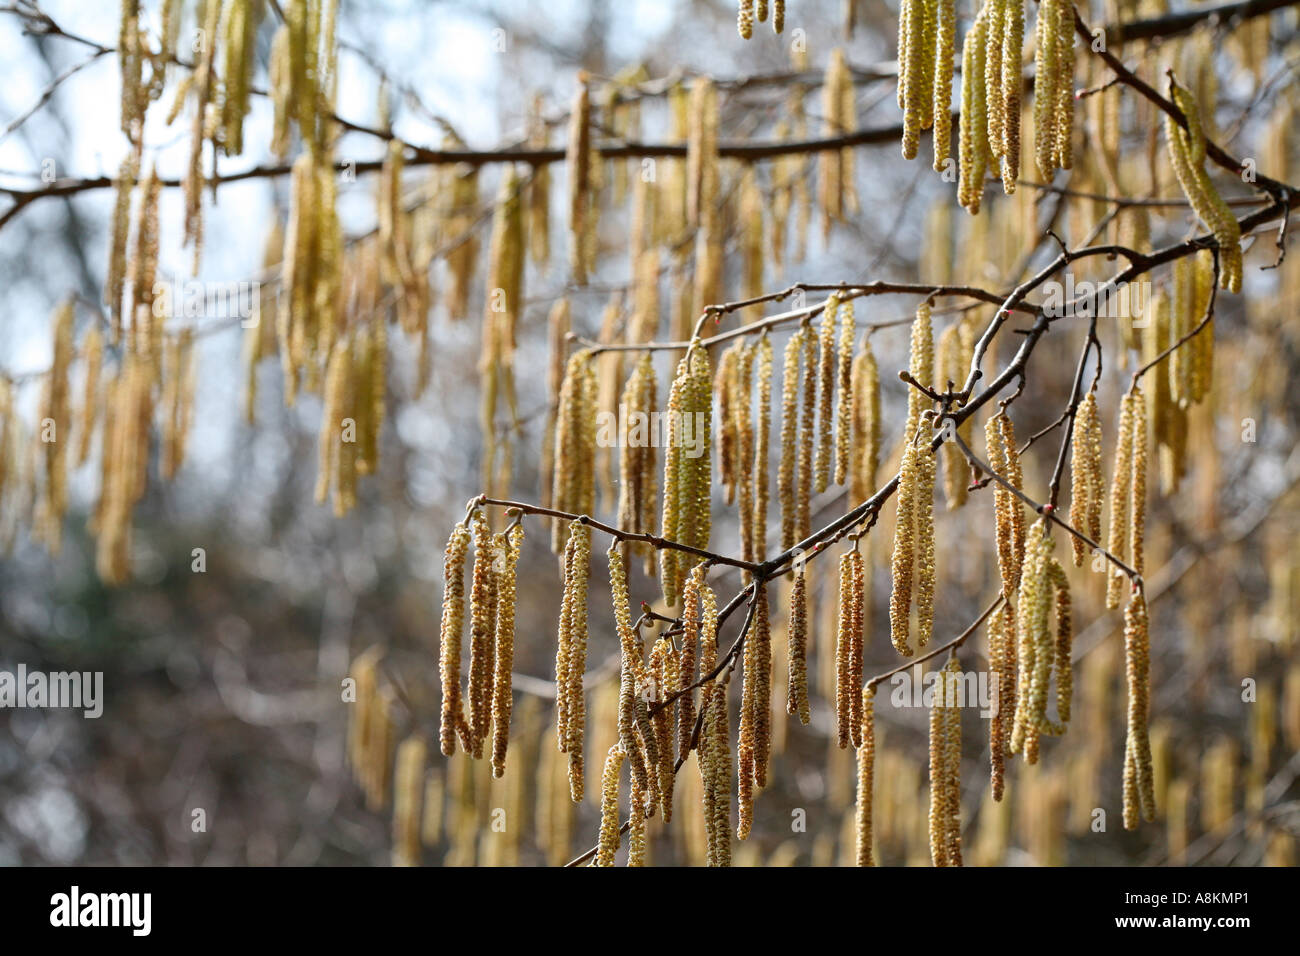 Common hazel tree (Corylus avellana) branches with young male catkins spreading pollen during pleasant sunny spring day. Pollen is allergy trigger. Stock Photo